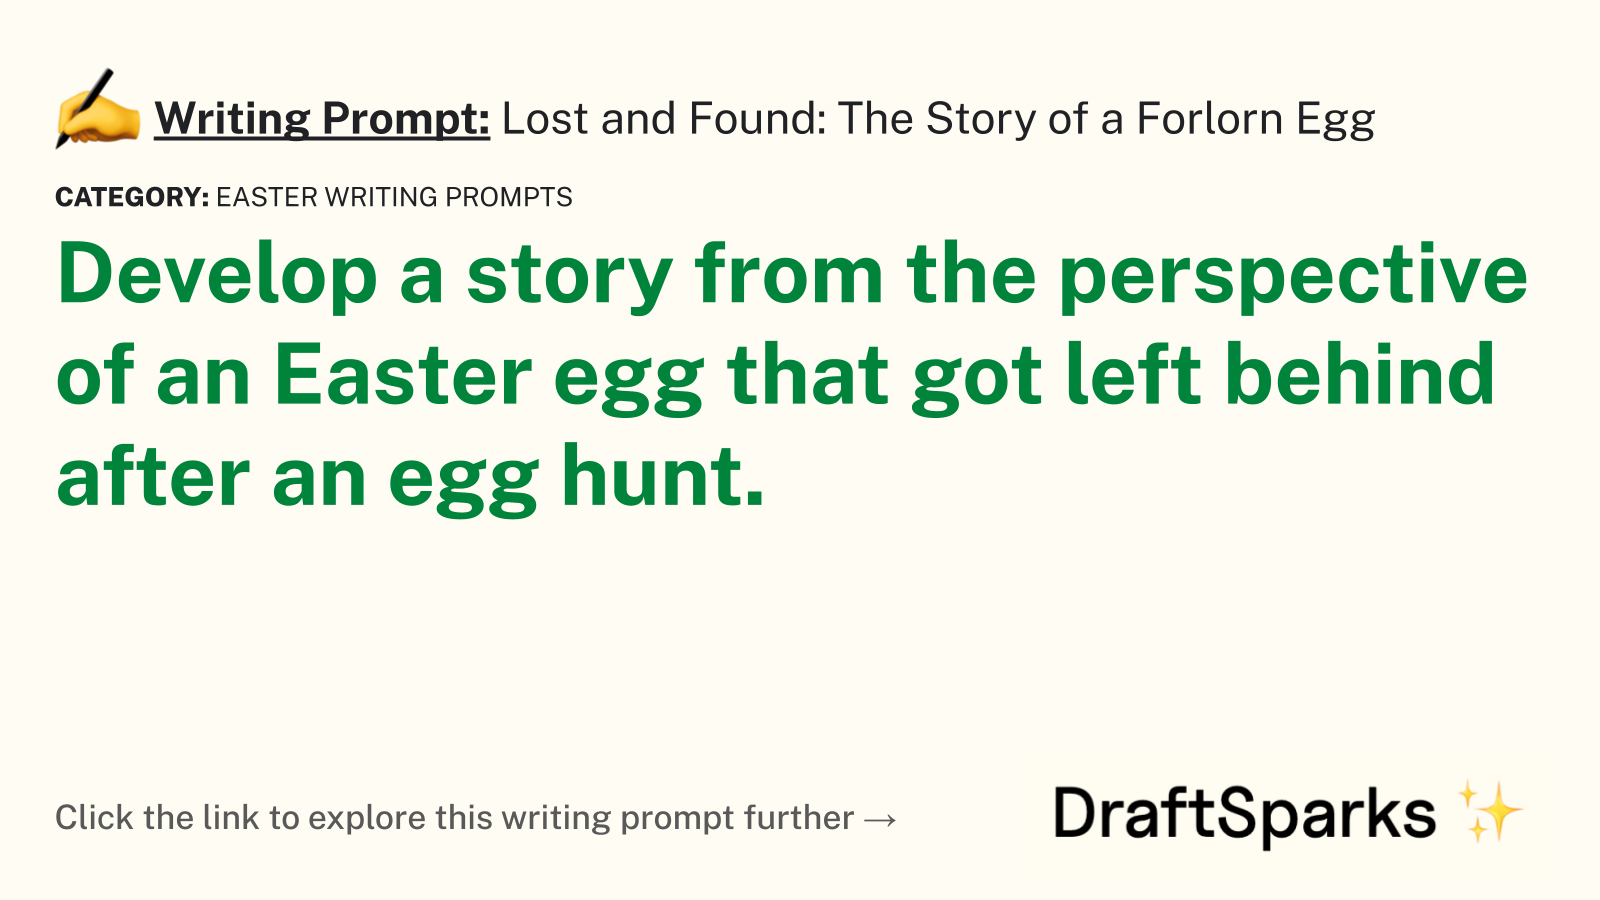 Lost and Found: The Story of a Forlorn Egg